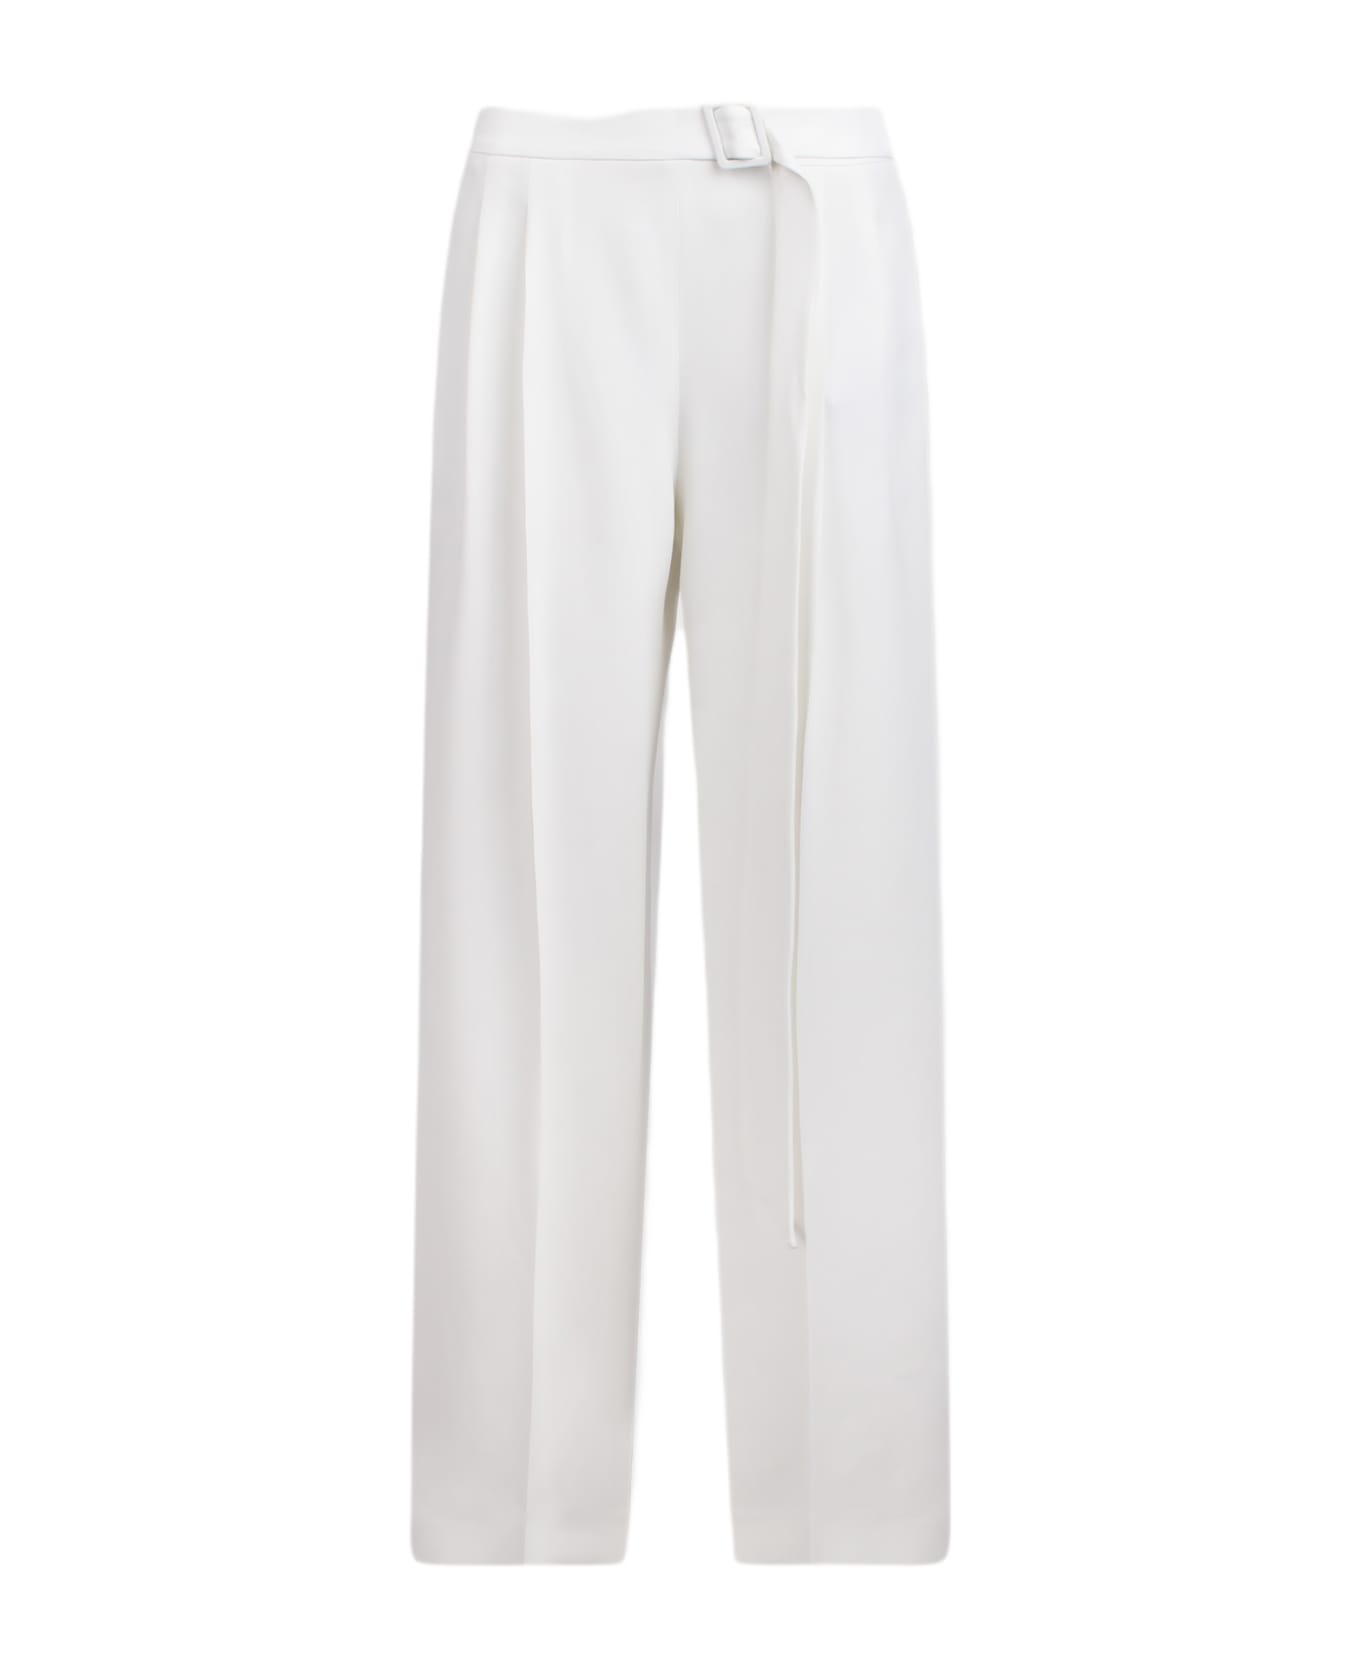 Ermanno Scervino Tailored Trousers ボトムス